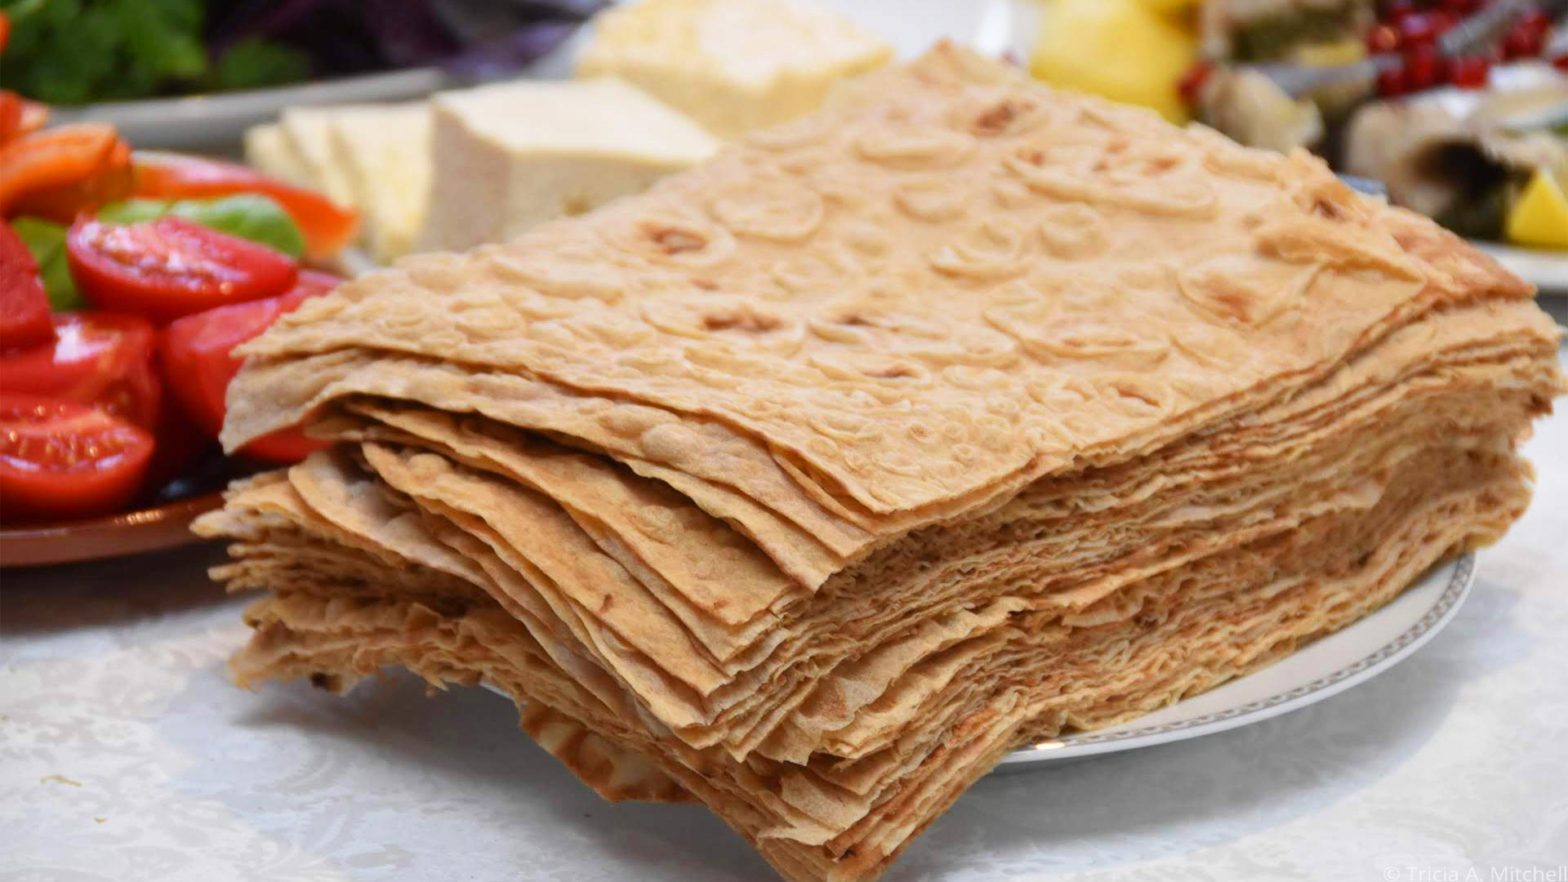 A stack of lavash in Armenia.